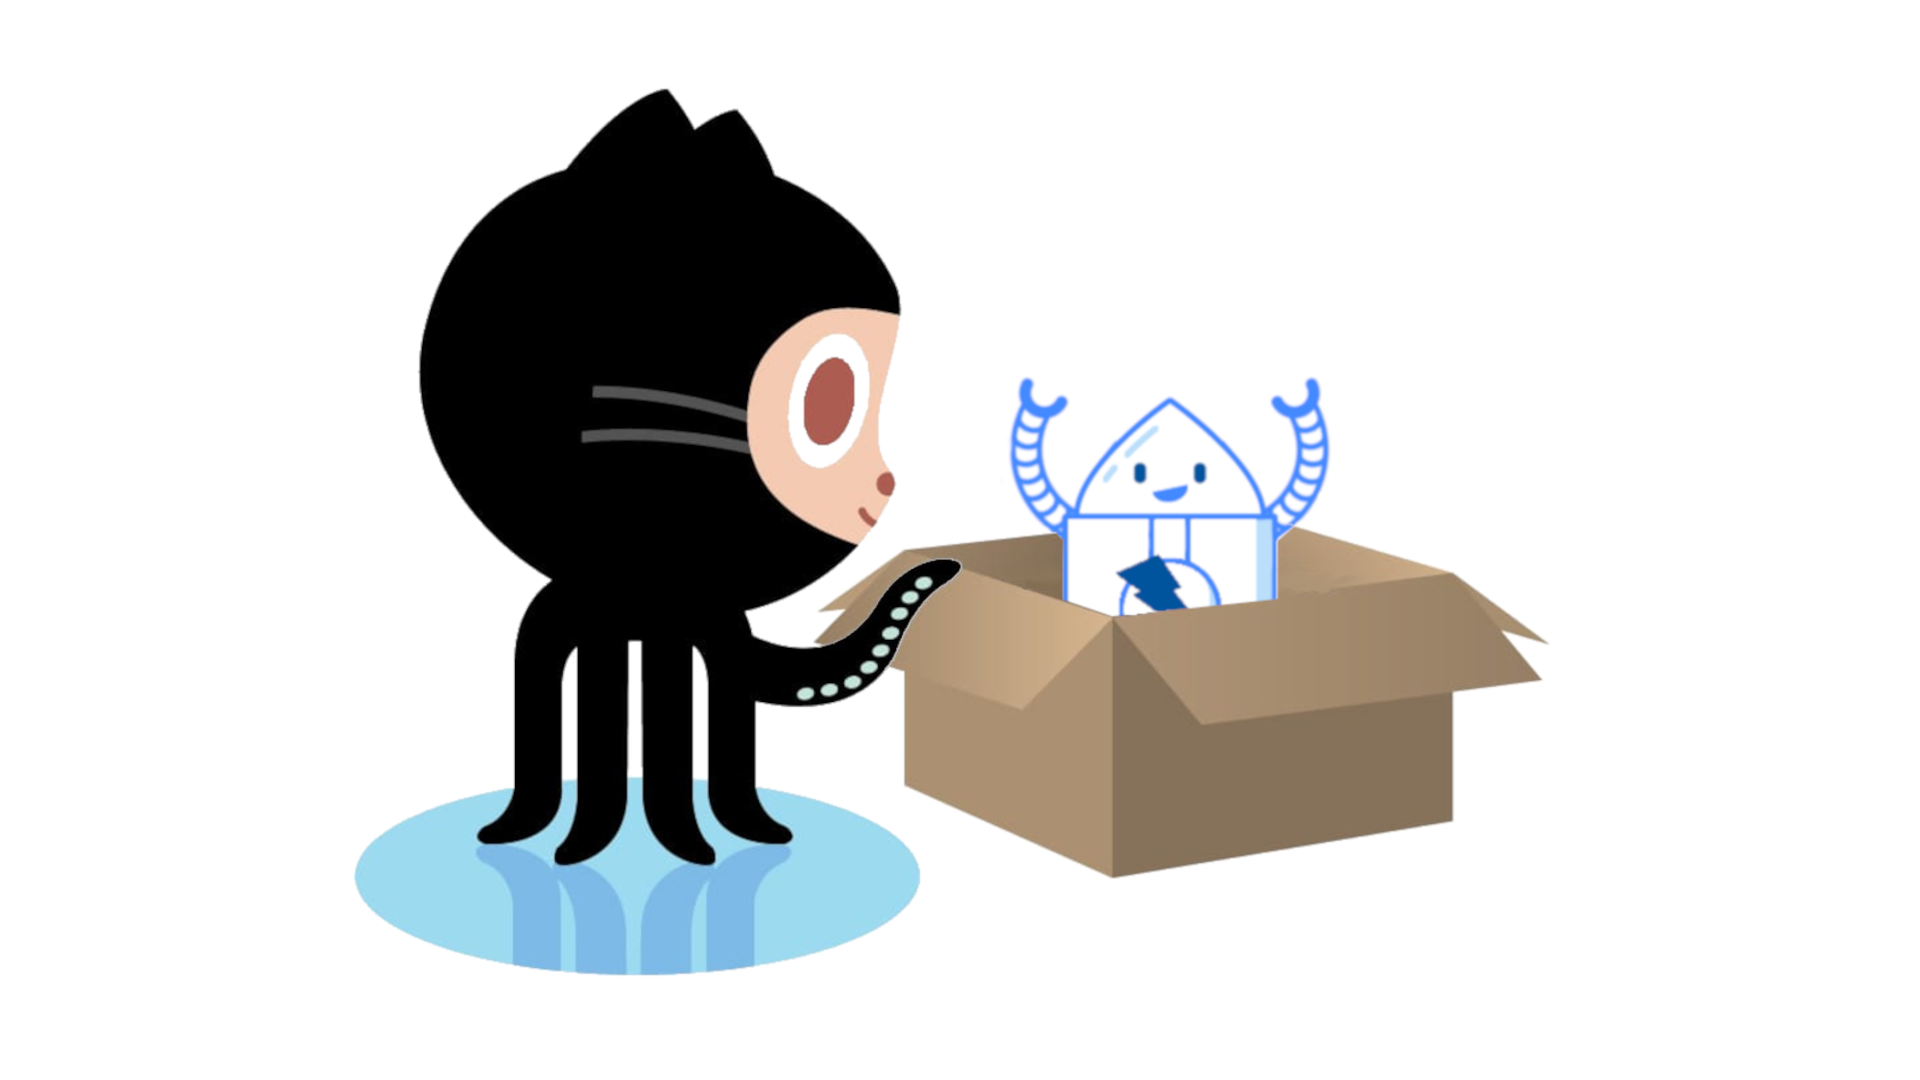 Standing Octocat looking at ZAPBot in a cardboard box